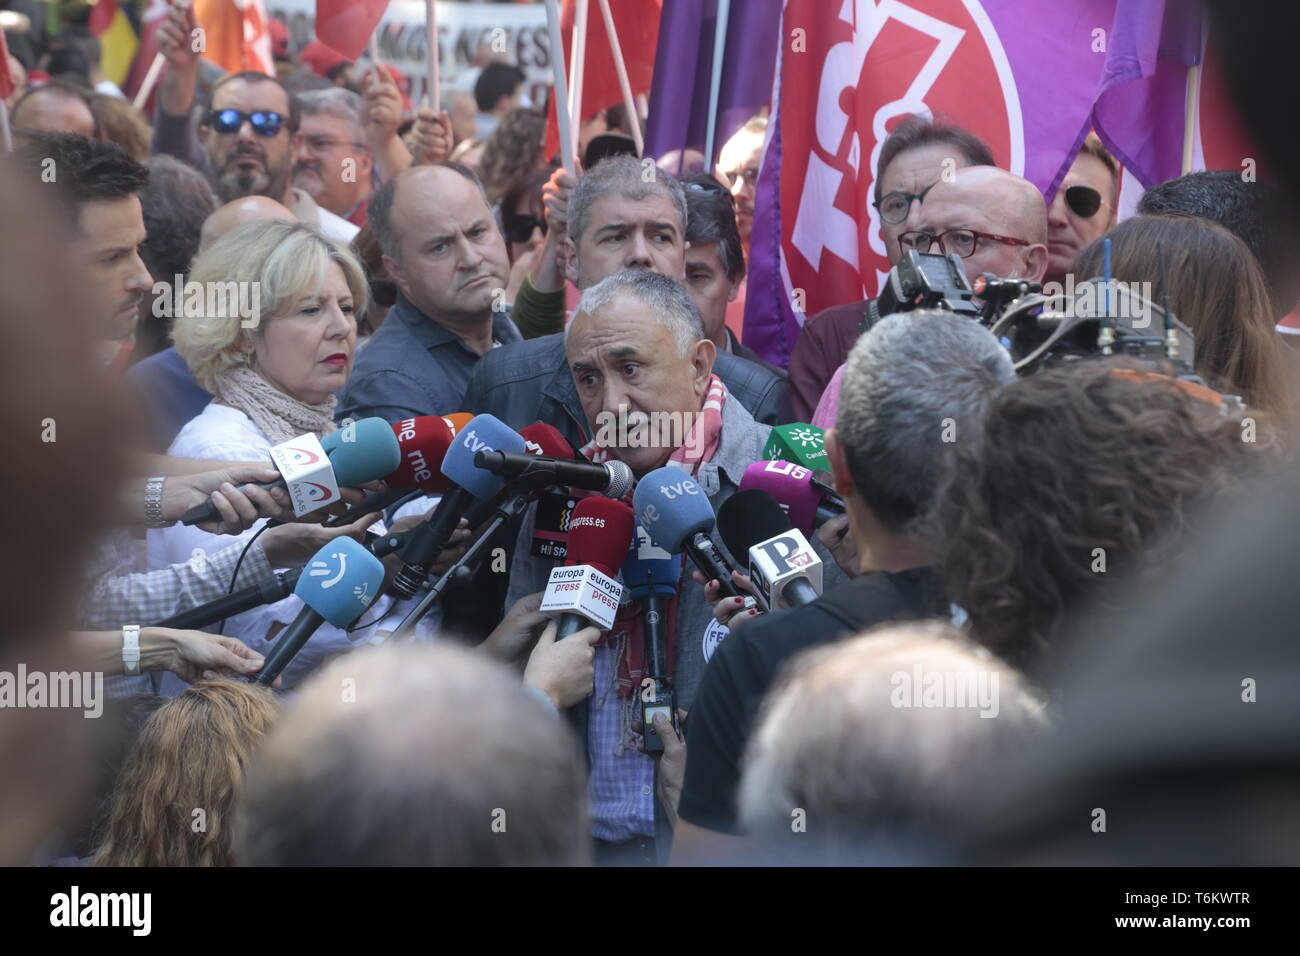 Pepe Álvarez, spokesman for the UGT union seen speaking to the media during the protest. Thousands of protesters demonstrate on the International Workers' Day convoked by the majority unions UGT and CCOO to demand policies and reductions in unemployment levels in Spain, against job insecurity and labour rights. Politicians of the PSOE and Podemos have participated in the demonstration. Stock Photo